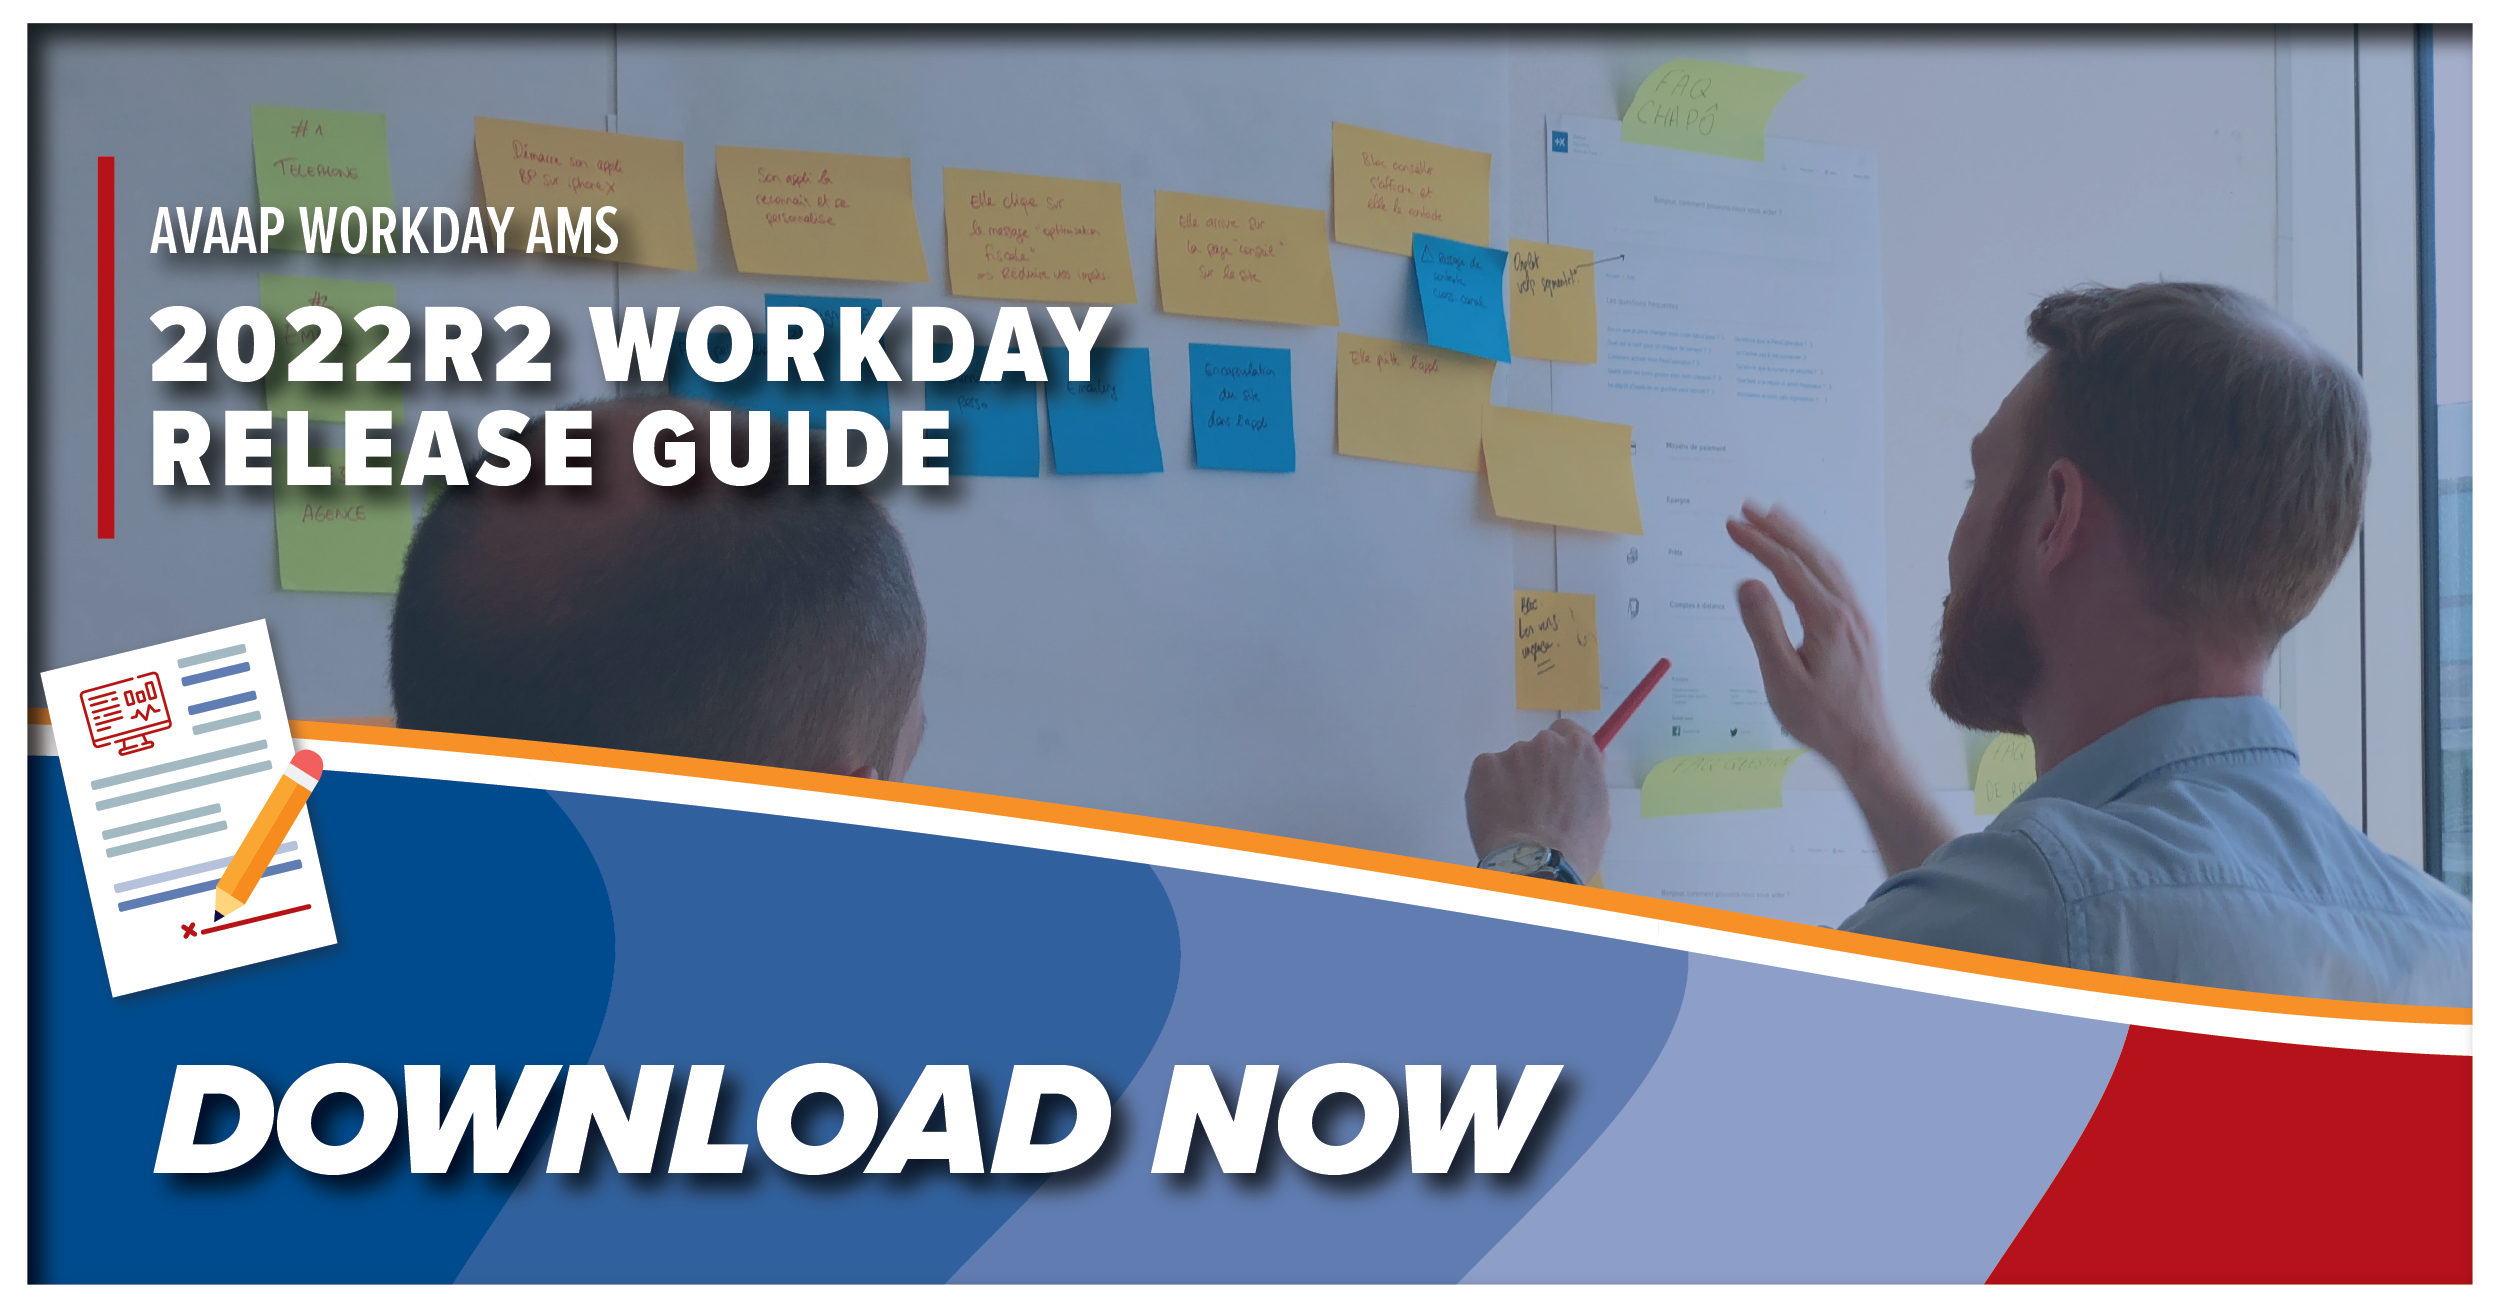 2022R2 Workday Release Guide Avaap